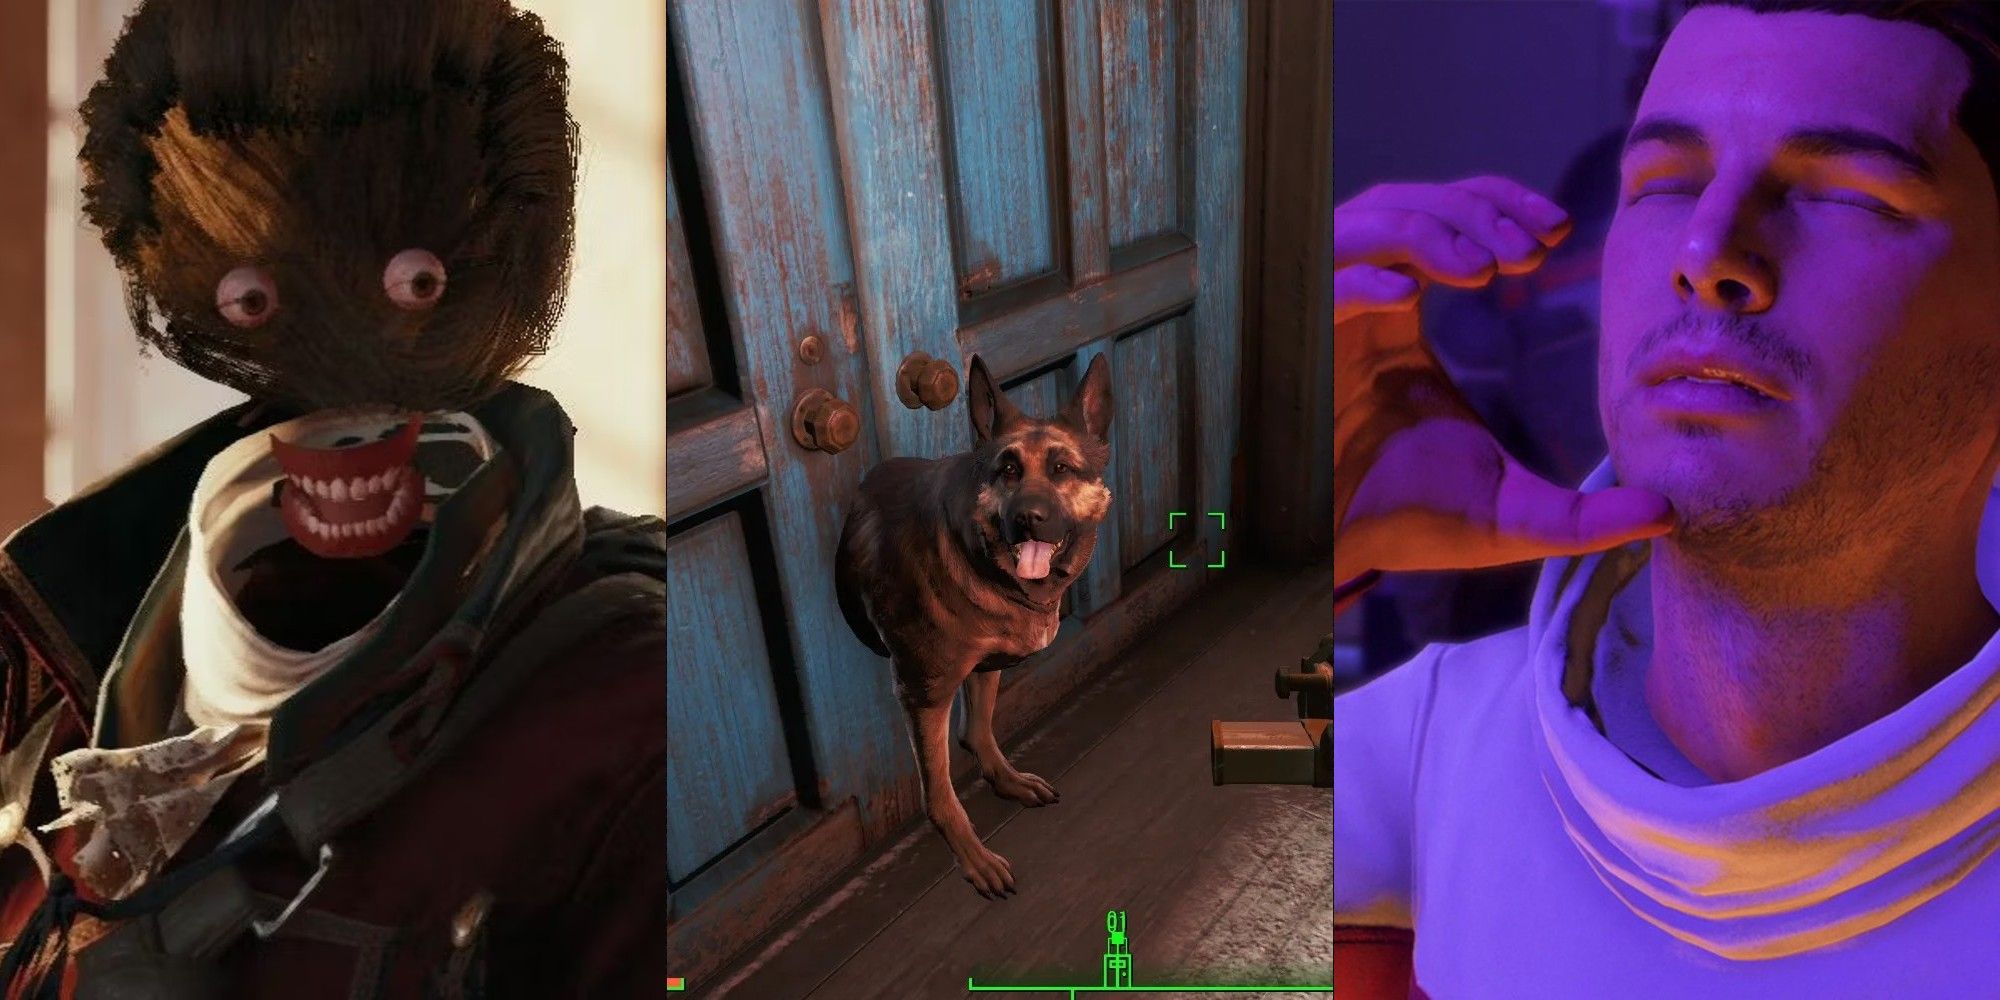 A split image of game glitches from Assassin's Creed: Unity, Fallout 76, and Mass Effect: Andromeda